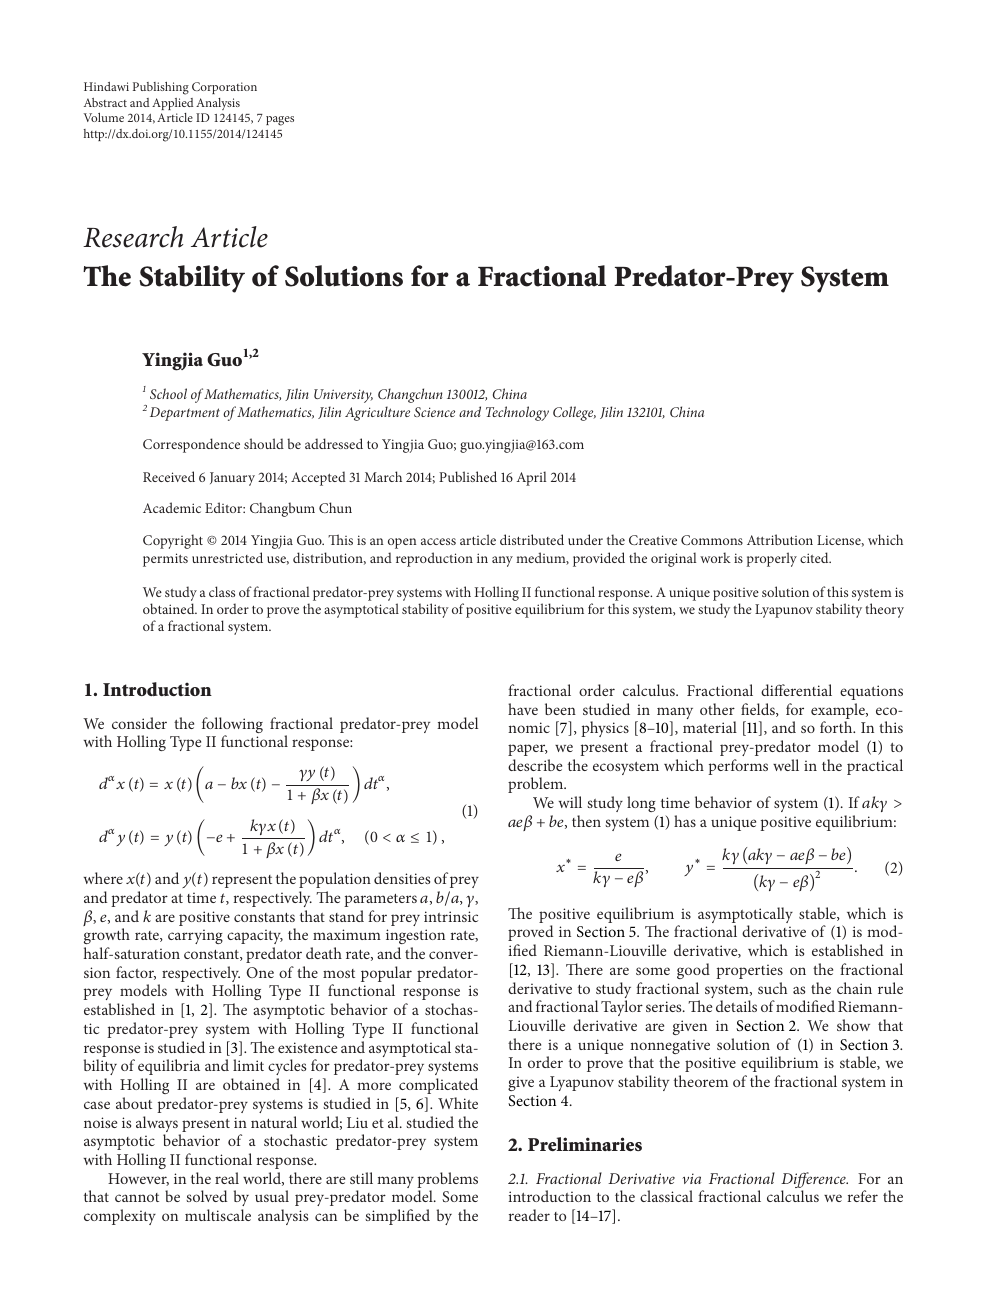 The Stability Of Solutions For A Fractional Predator Prey System Topic Of Research Paper In Mathematics Download Scholarly Article Pdf And Read For Free On Cyberleninka Open Science Hub